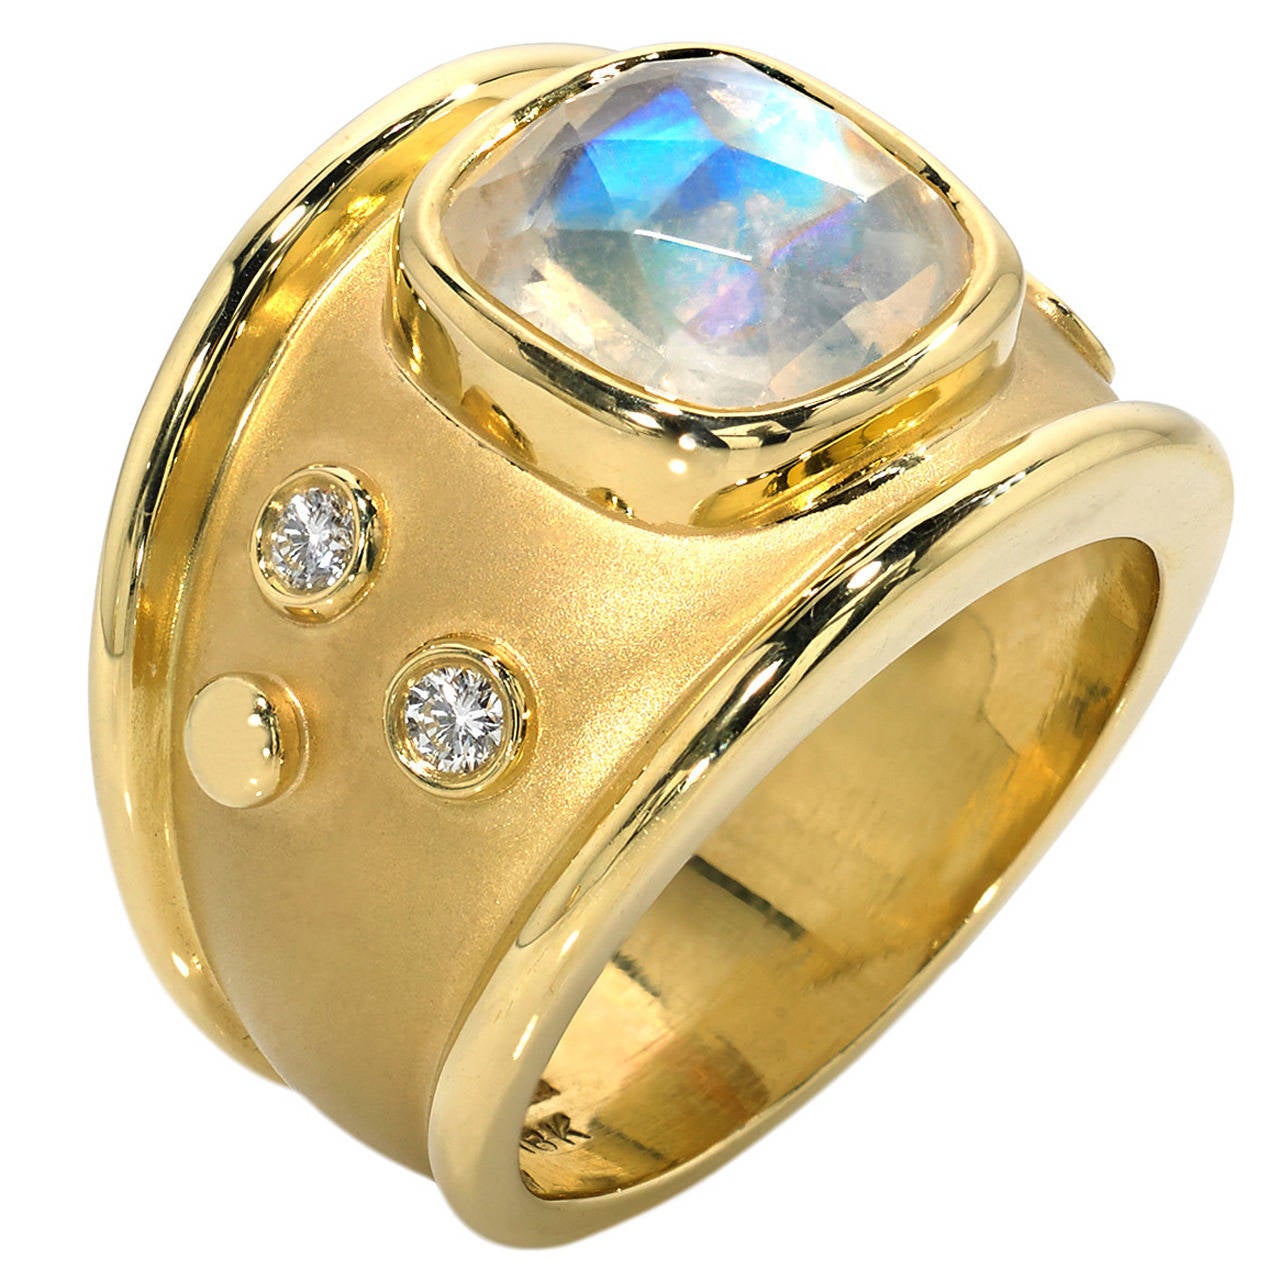 Faceted Rainbow Moonstone Diamond Satin Gold Cocktail Ring at 1stdibs